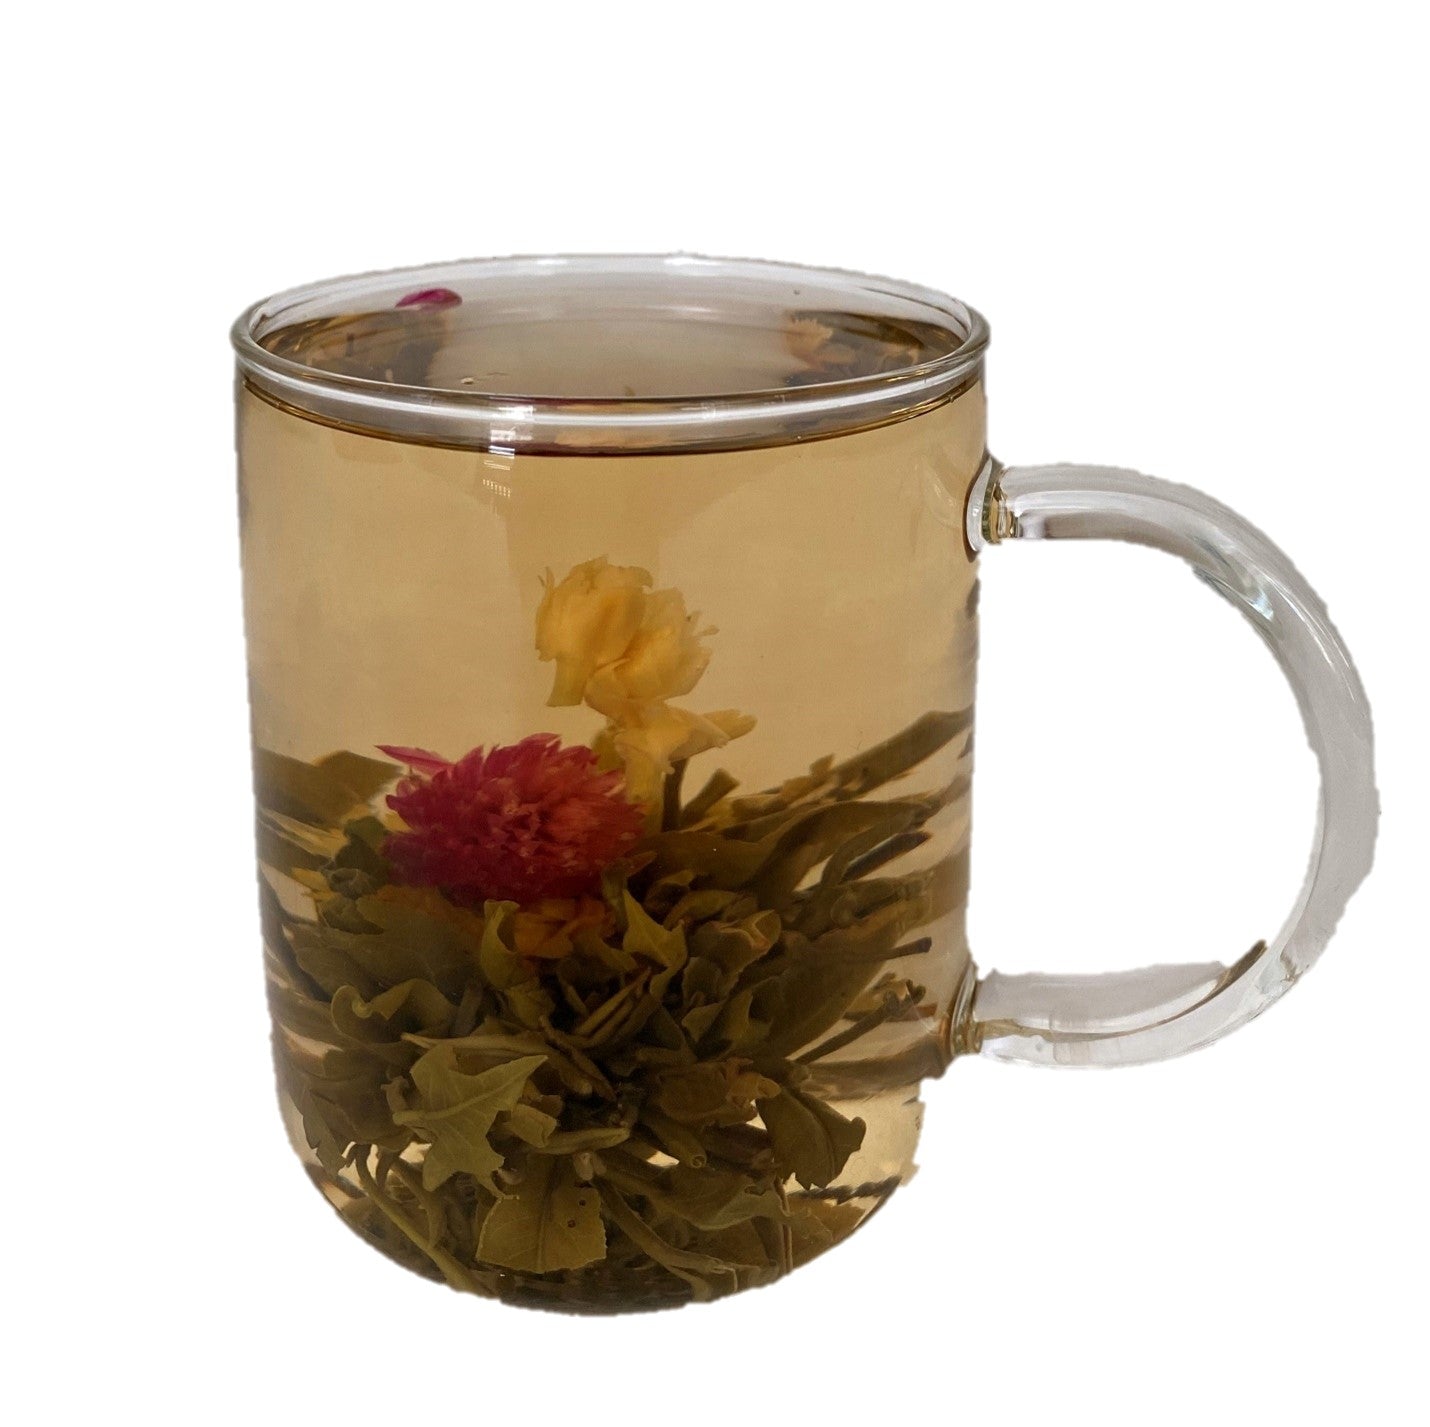 Jasmine flowering tea with pink and white flowers